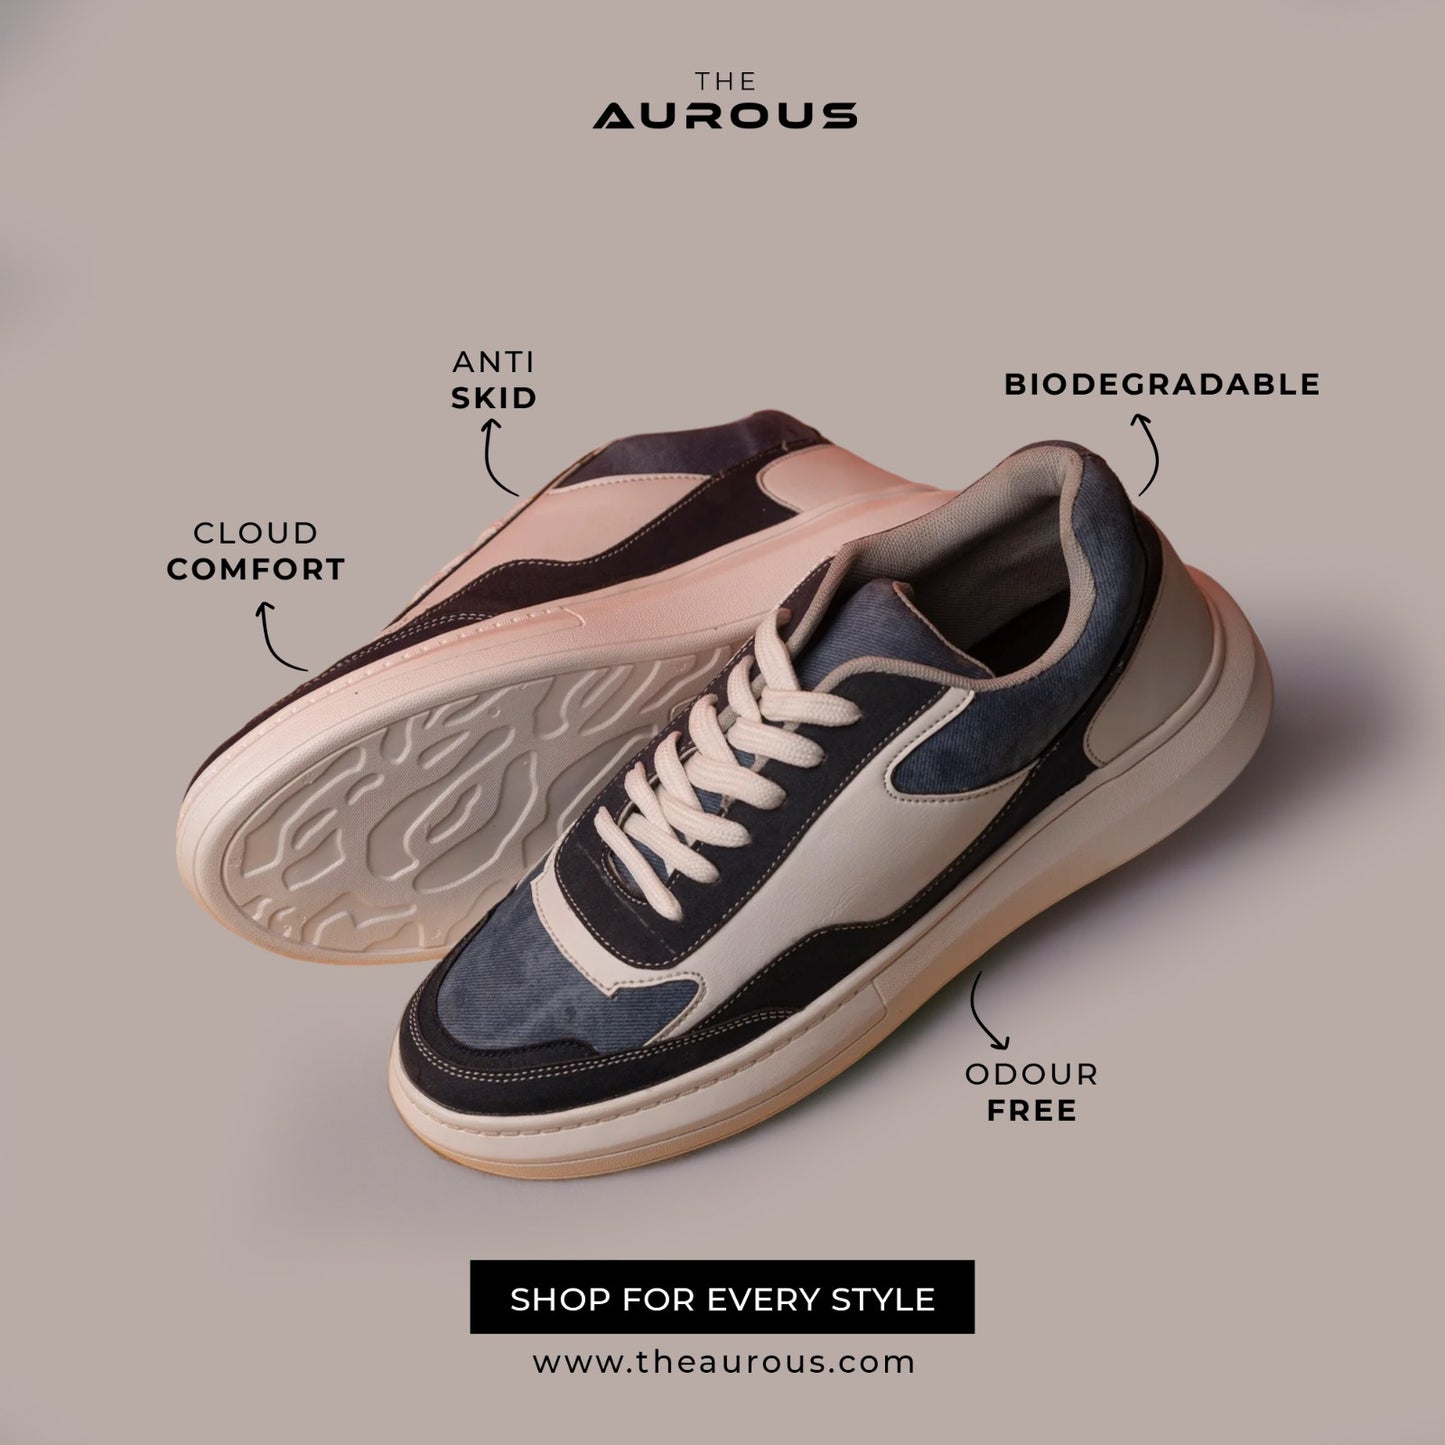 The Aurous Dynamo Laceup Sneakers